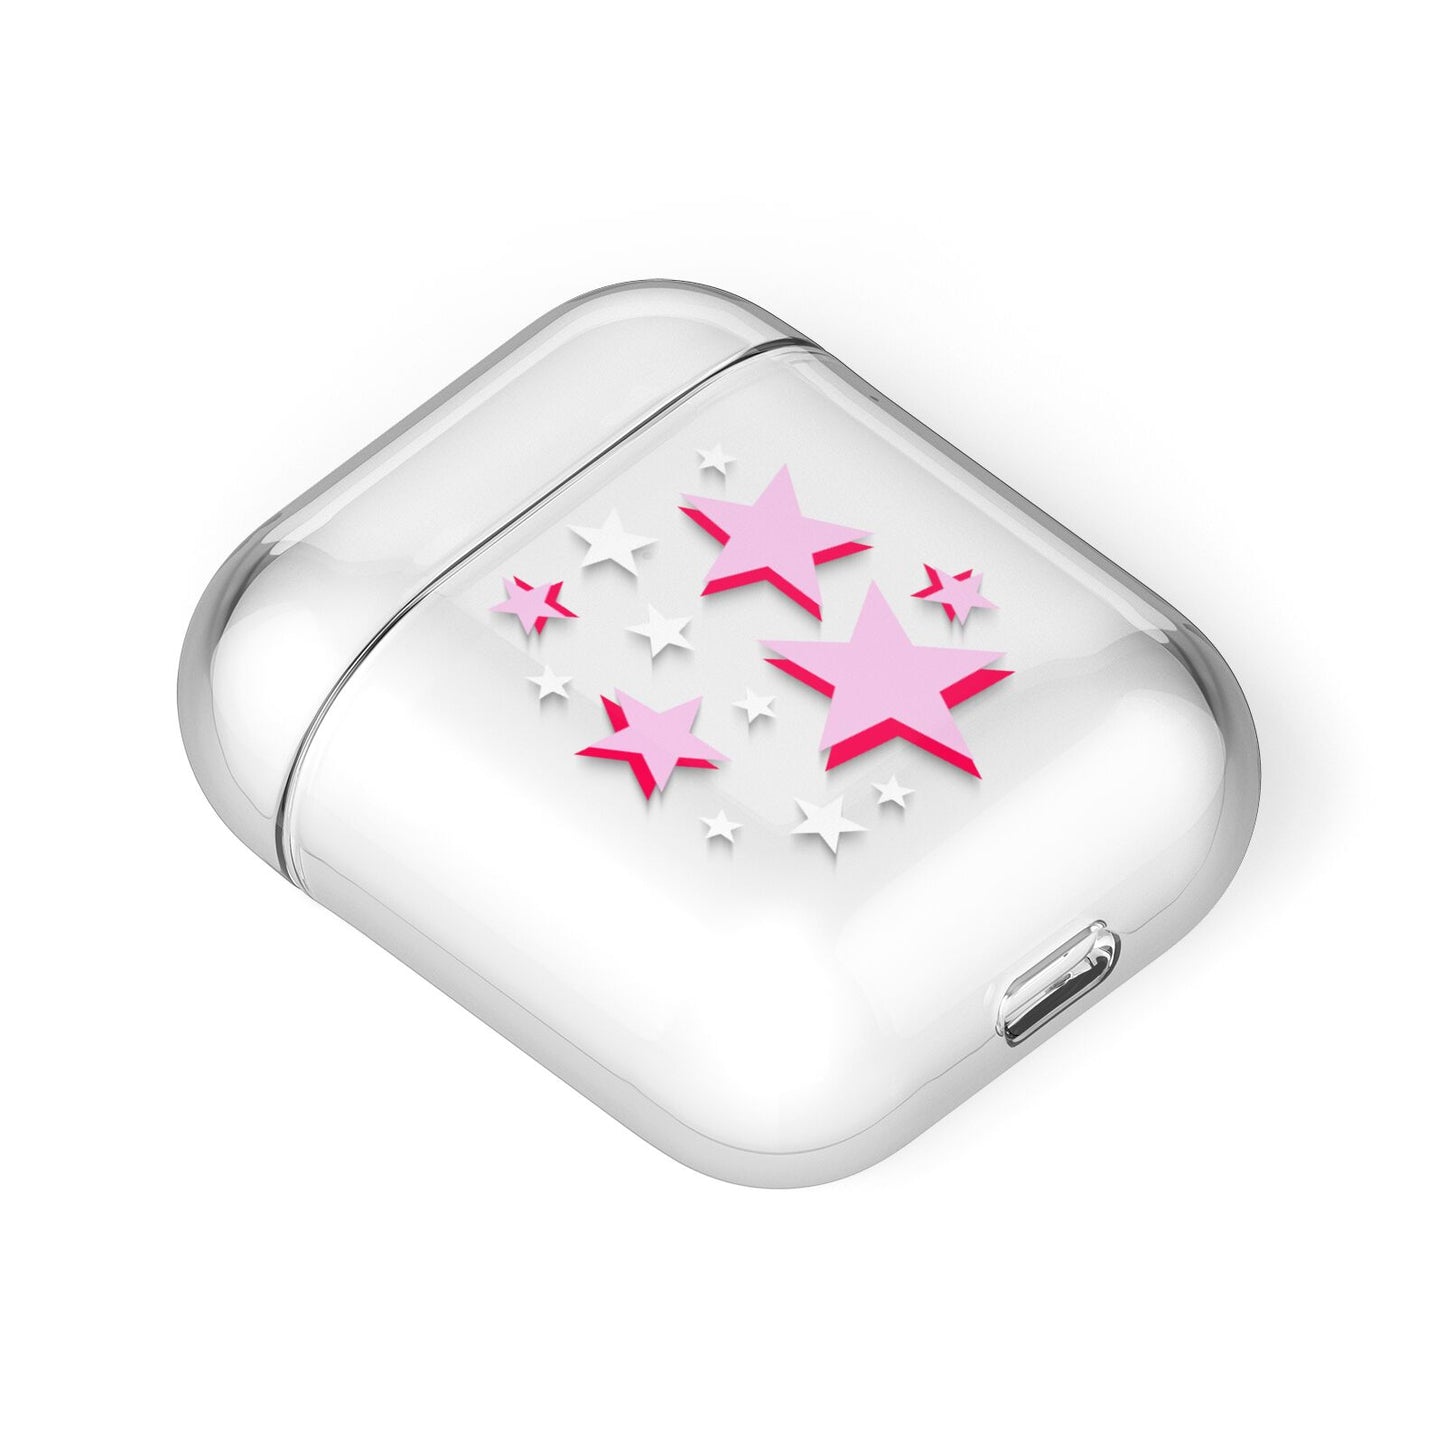 Pink Star AirPods Case Laid Flat